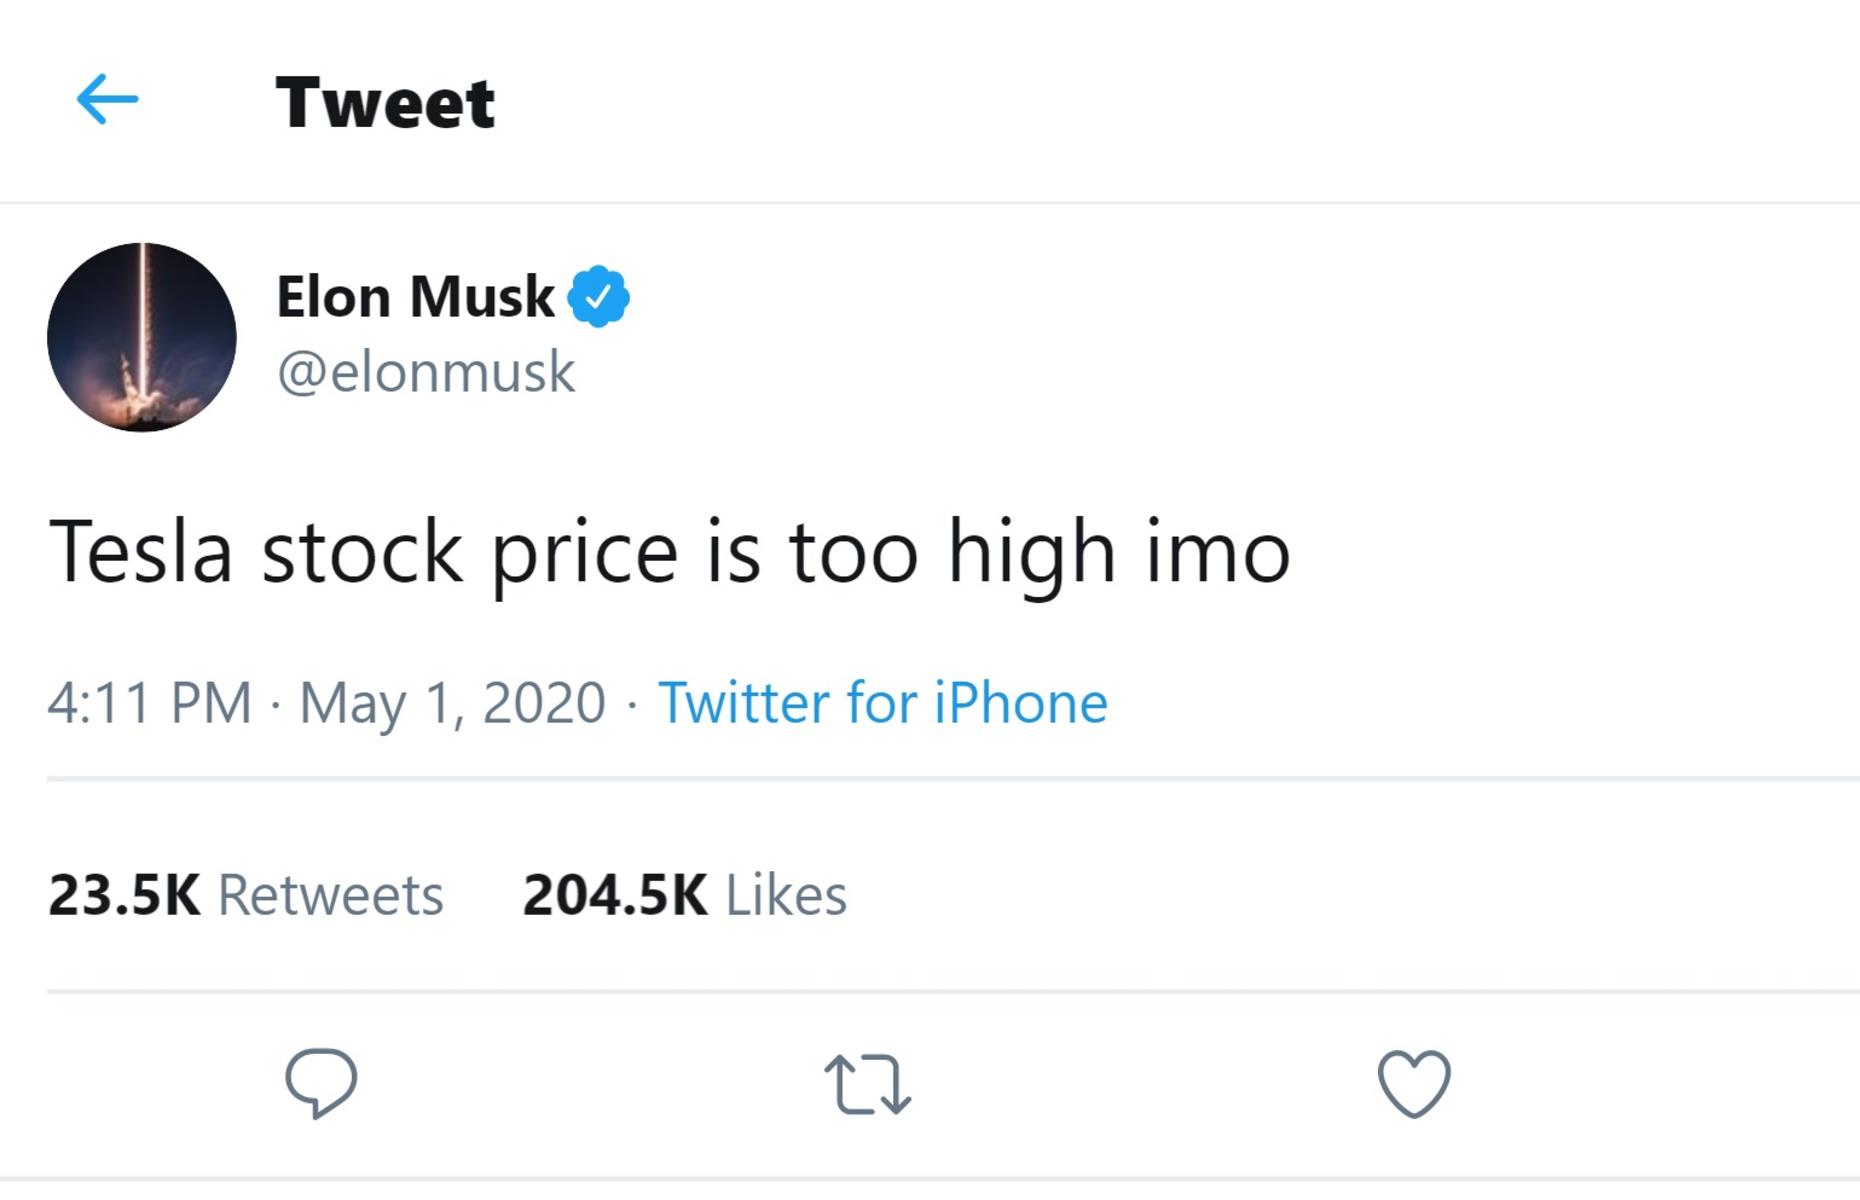 <p>In yet another controversial tweet, at the start of May Musk claimed that Tesla's stock price was too high, causing it to fall immediately and <a href="https://www.marketwatch.com/story/elon-musk-tweets-that-tesla-shares-are-too-high-2020-05-01">wiping nearly $15 billion (£12.4bn) off the company's valuation in just a day</a>. Shares were $760 (£630) at the time and fell by about 10%. The comment doesn't seem to have done lasting damage, however, with shares quickly rising up to $800 (£660) by 15 May. </p>